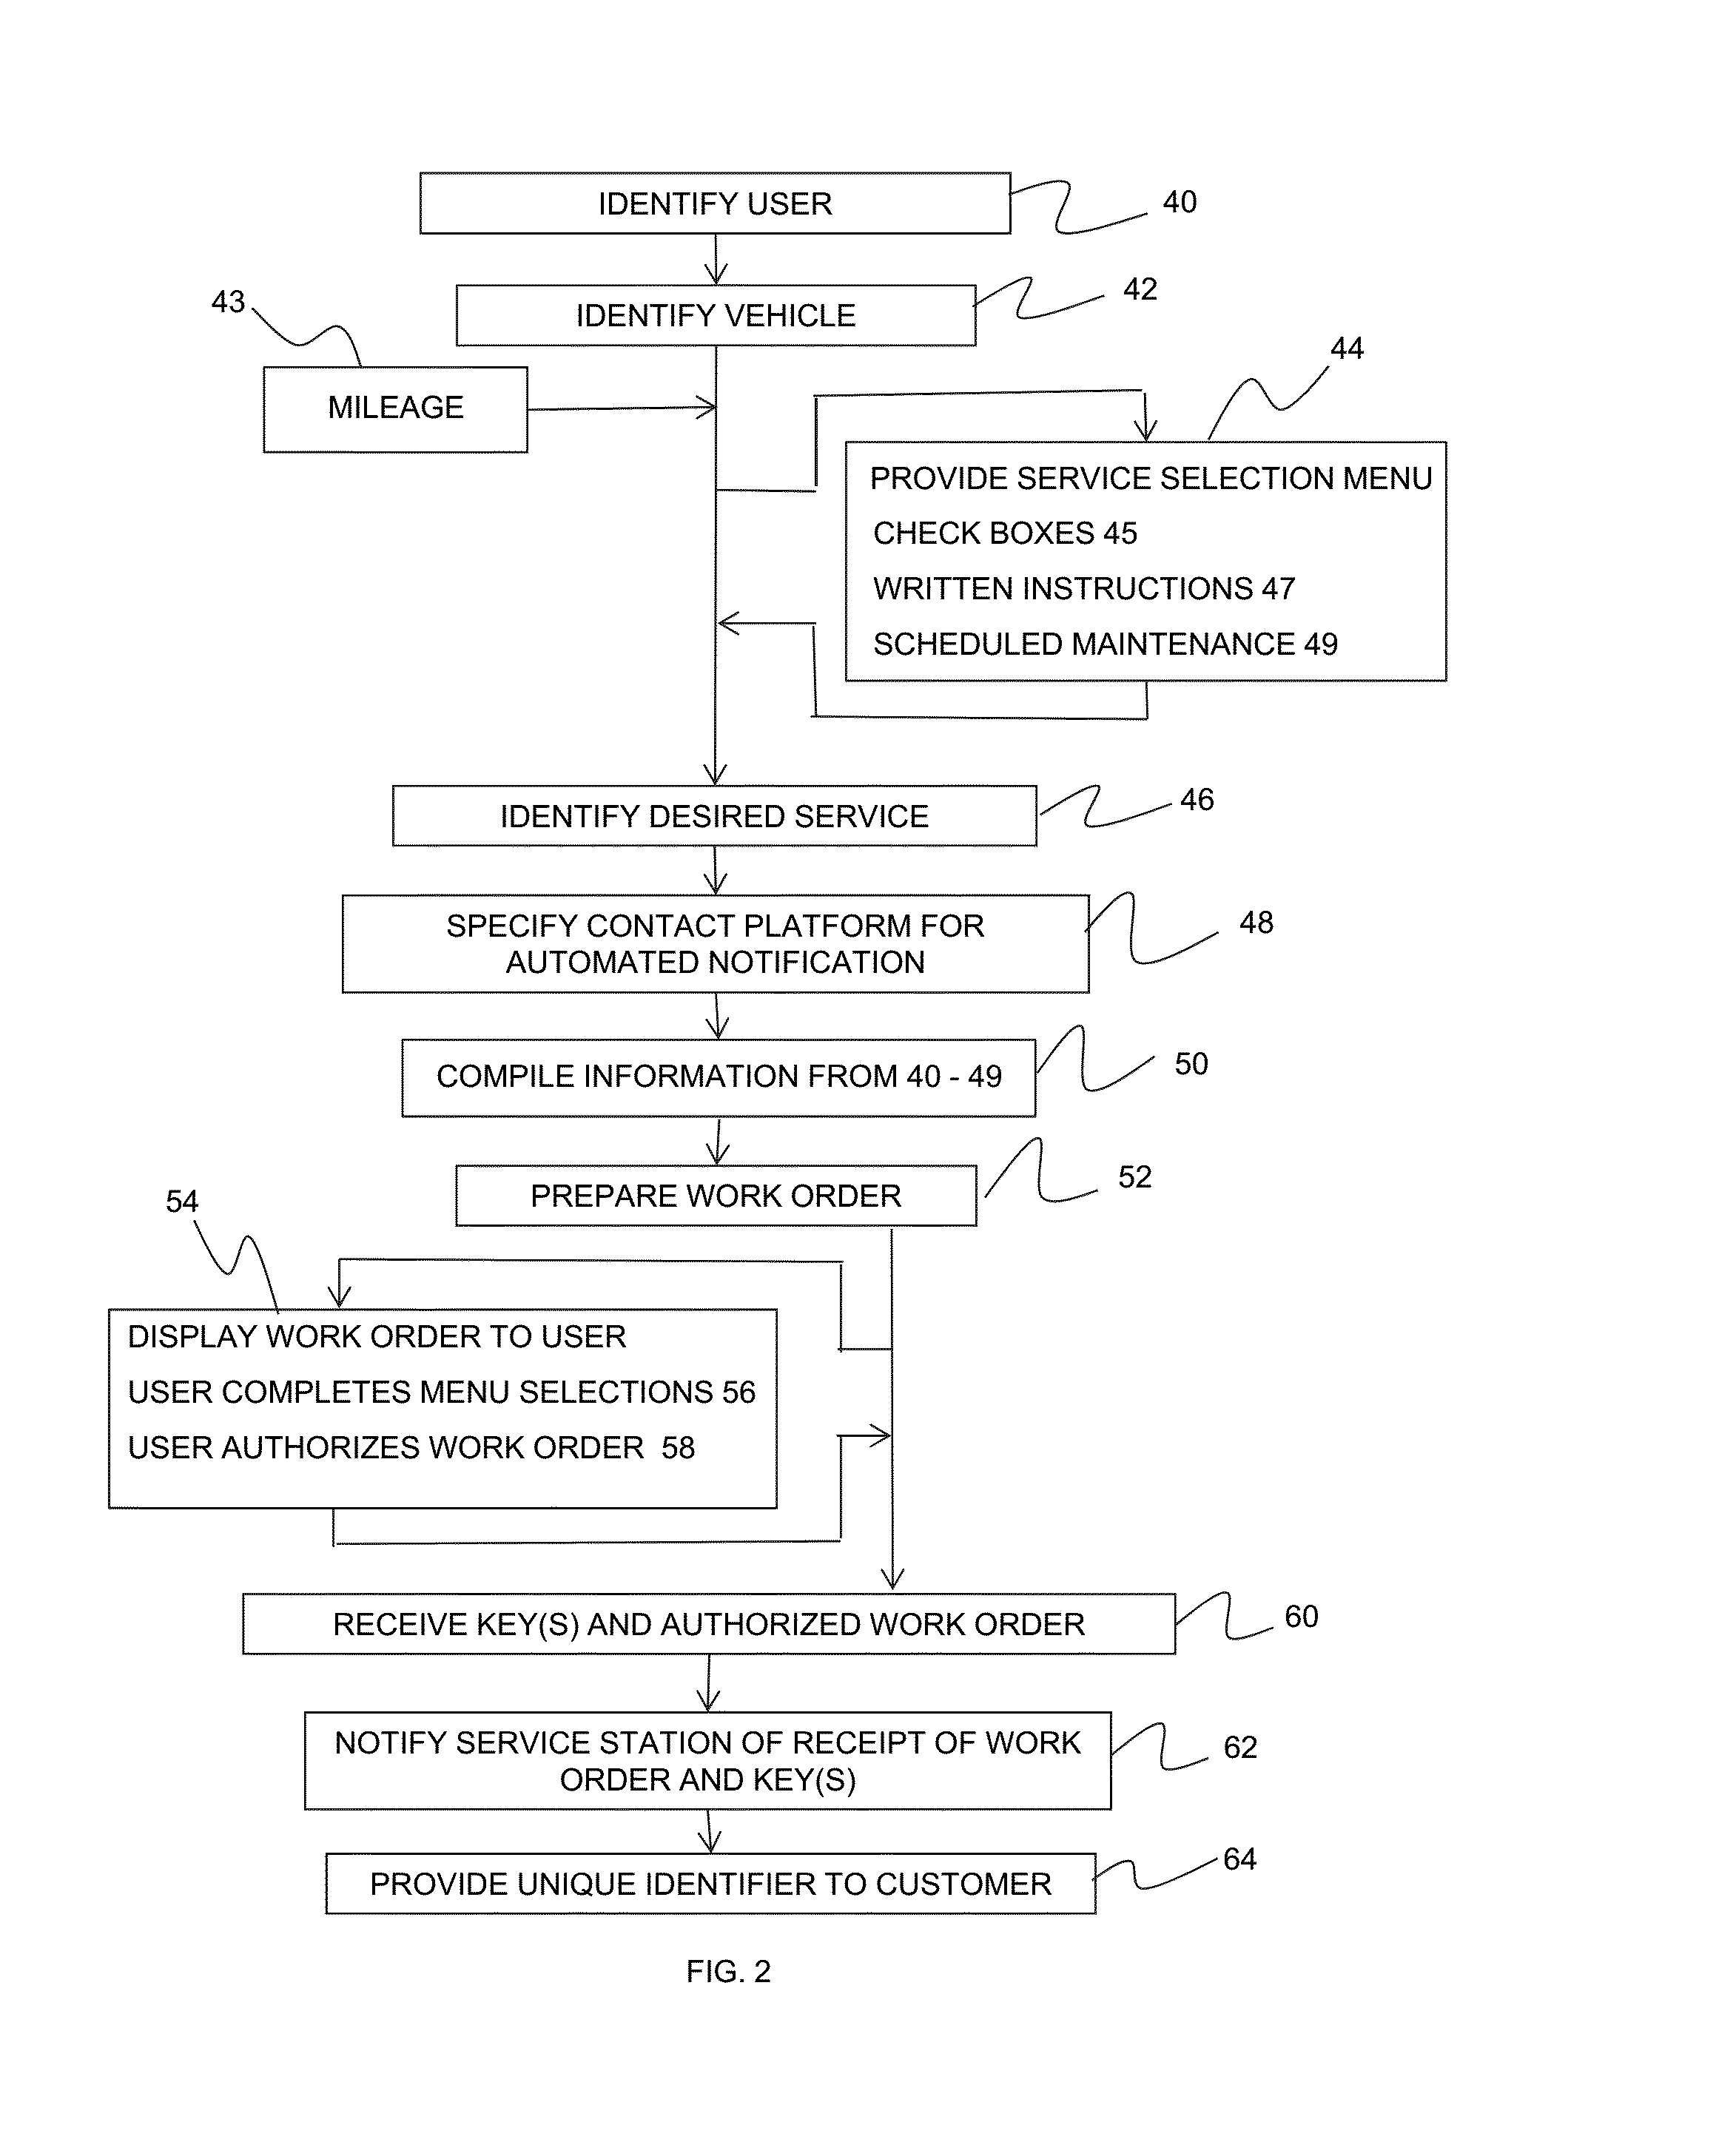 Software application for the automated drop-off and pick-up of a service item at a service facility